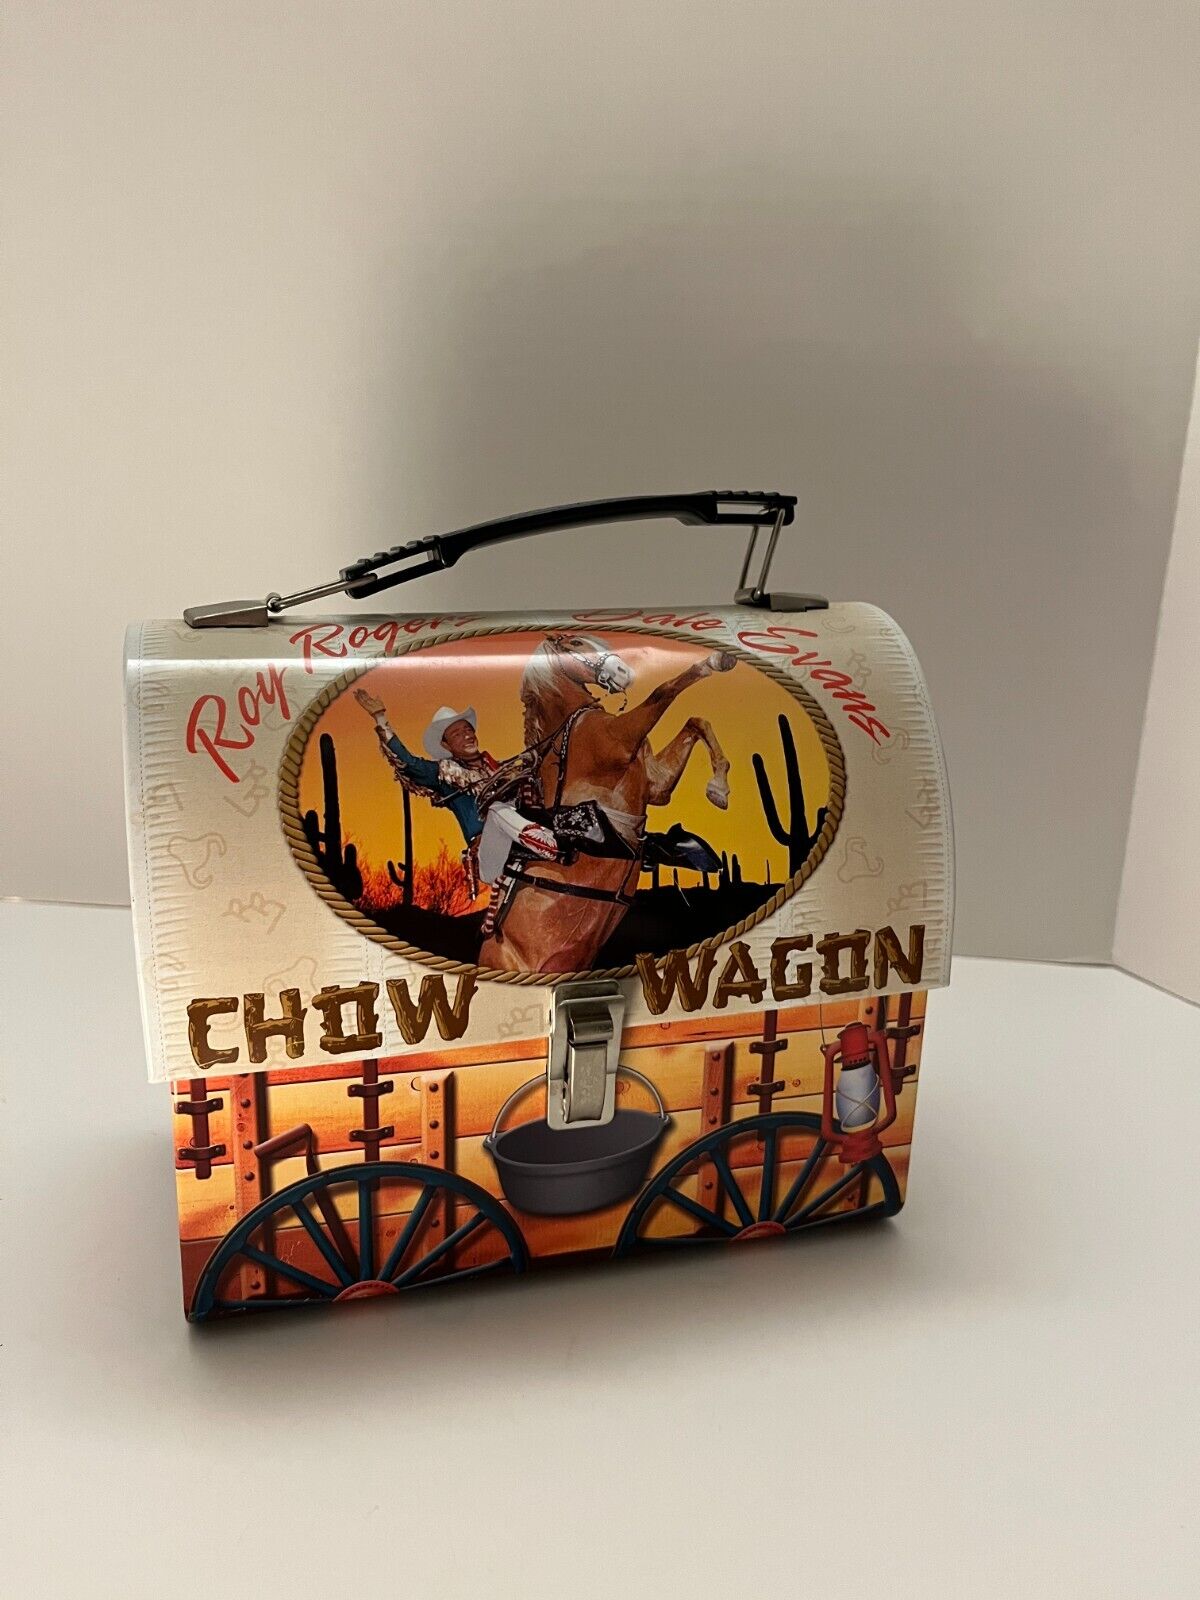 New Roy Rogers Dale Evans Trigger Chow Wagon lunchbox unused Dome Shaped Mint